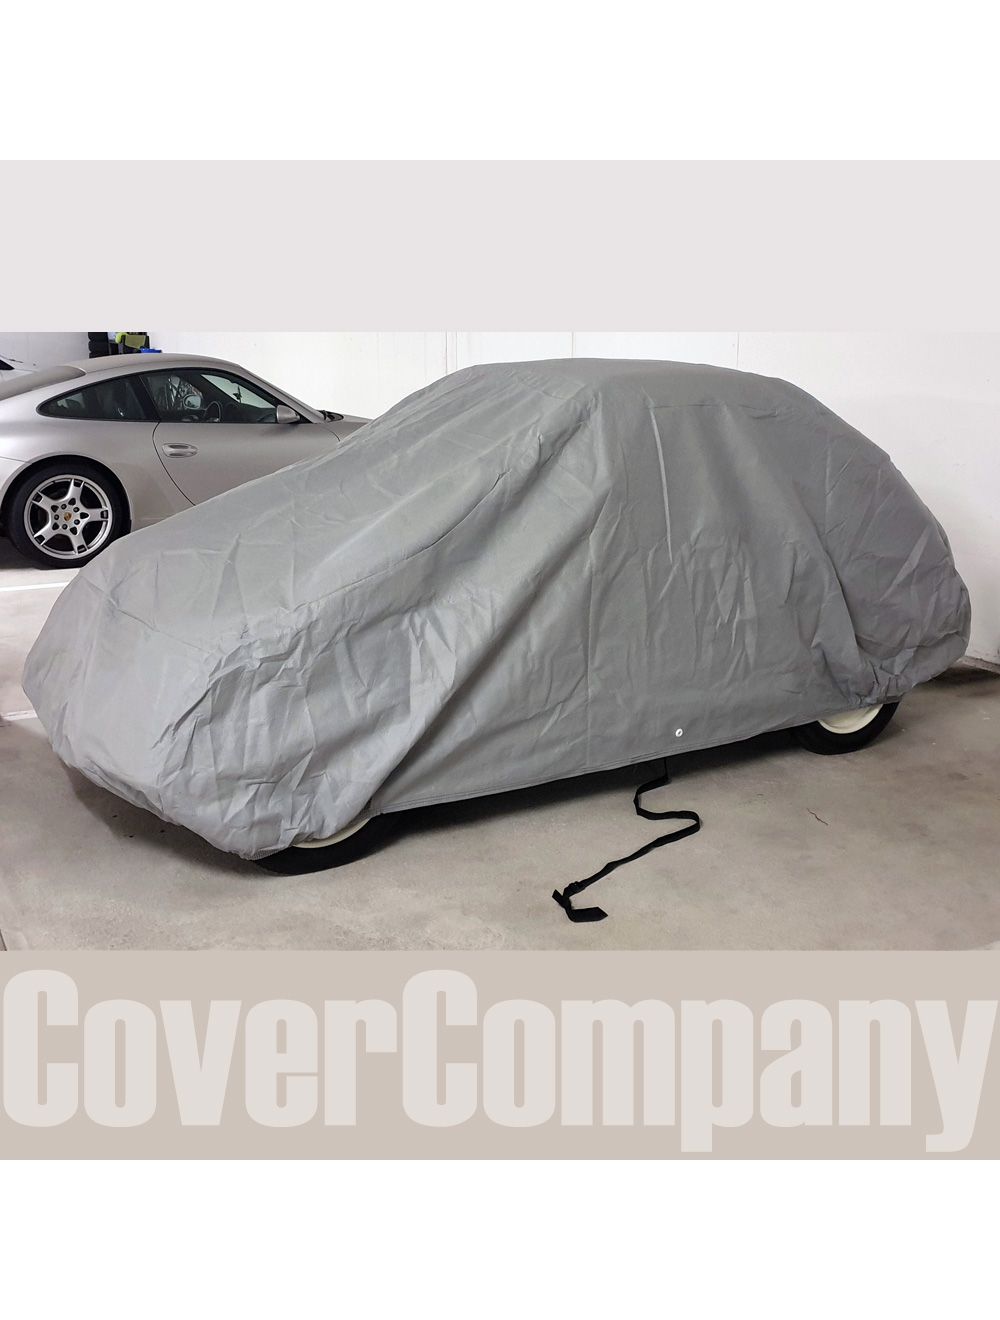 Outdoor Car Cover for Fiat. Waterproof Fiat Car Cover